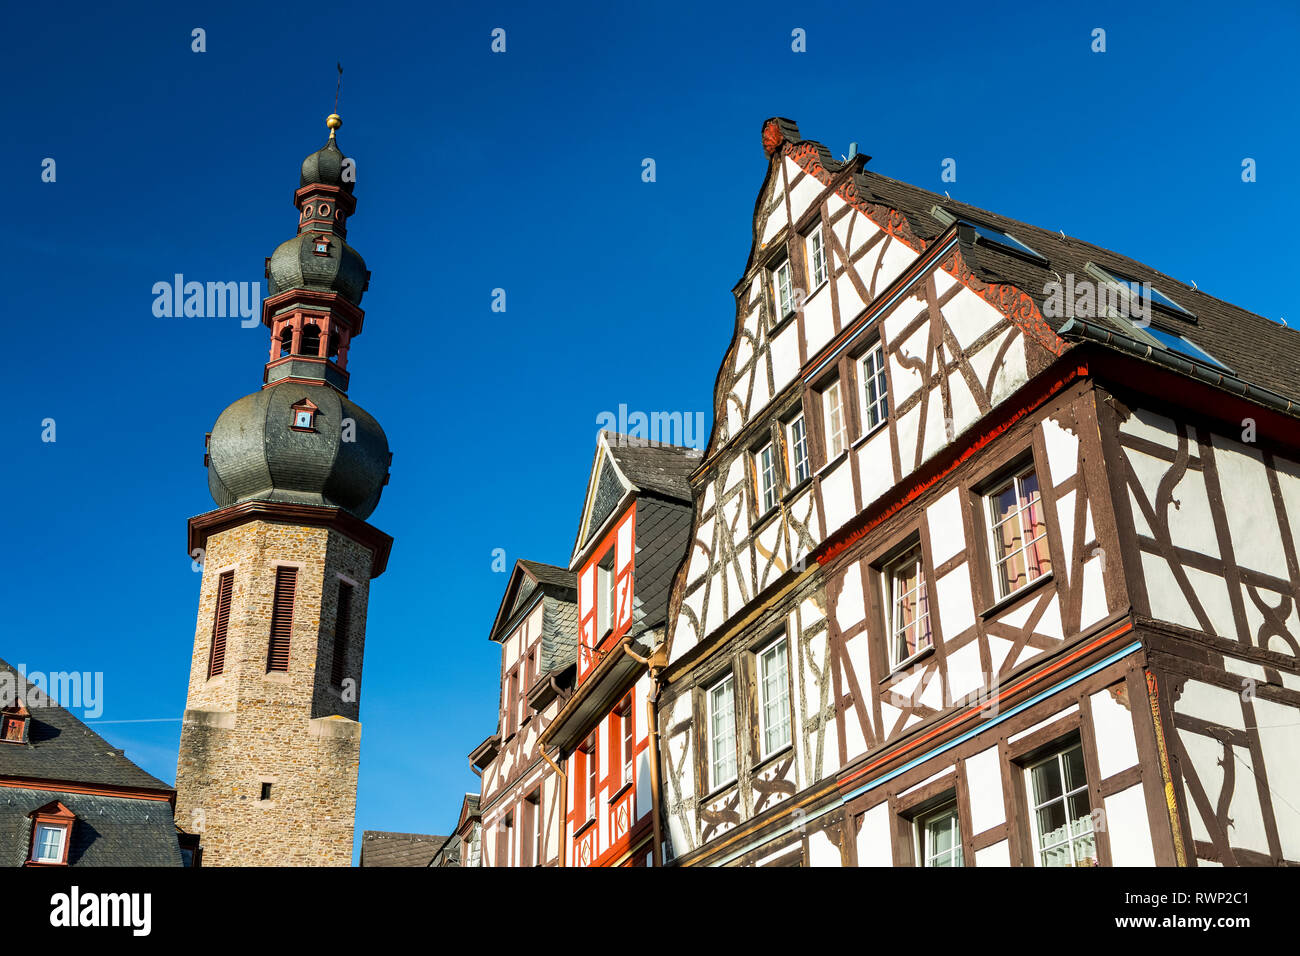 Old medieval building fronts with tall stone church tower and blue sky; Cochem, Germany Stock Photo